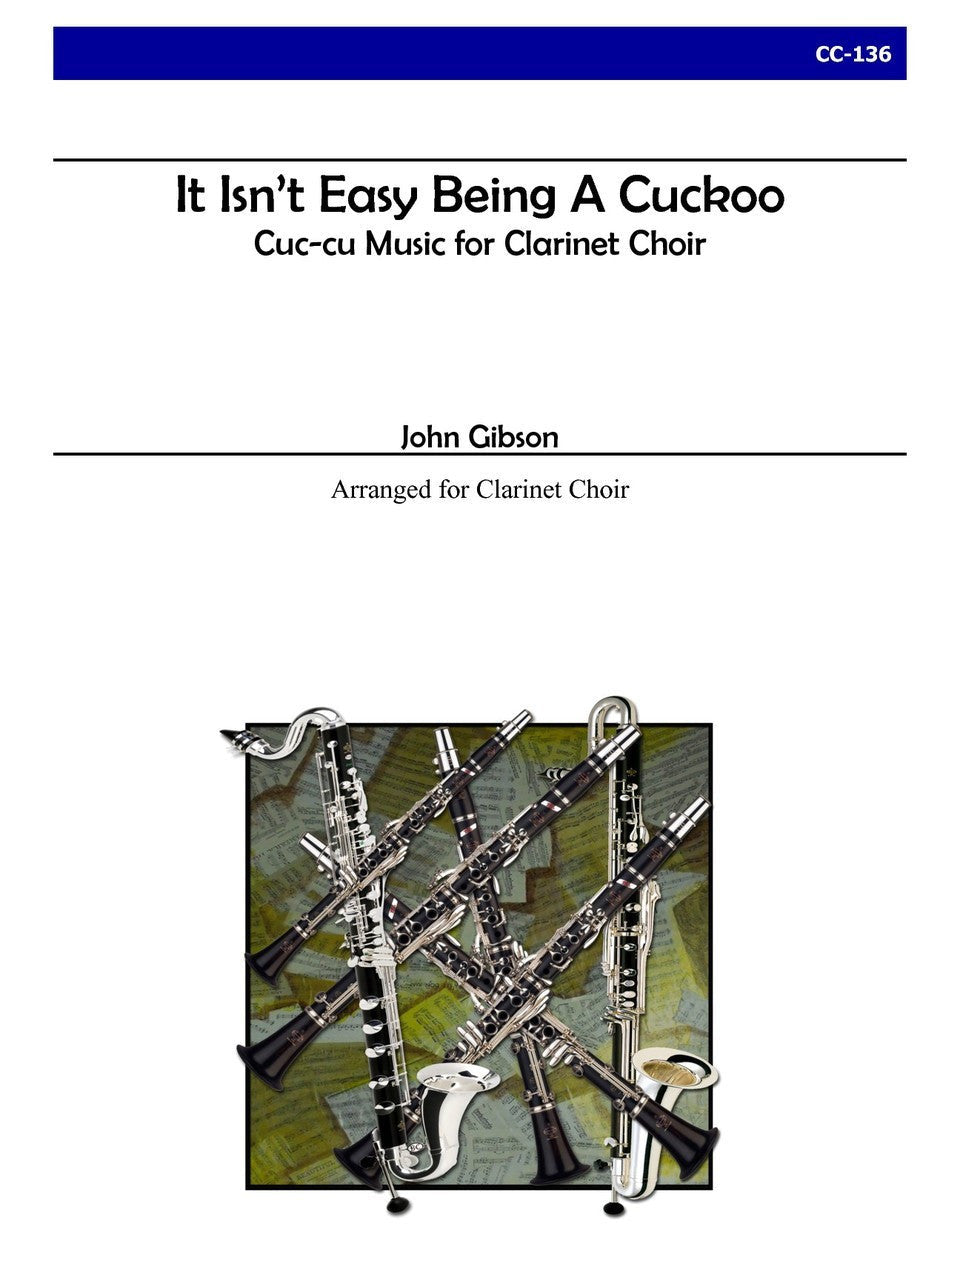 Gibson - It Isn’t Easy Being A Cuckoo for Clarinet Choir